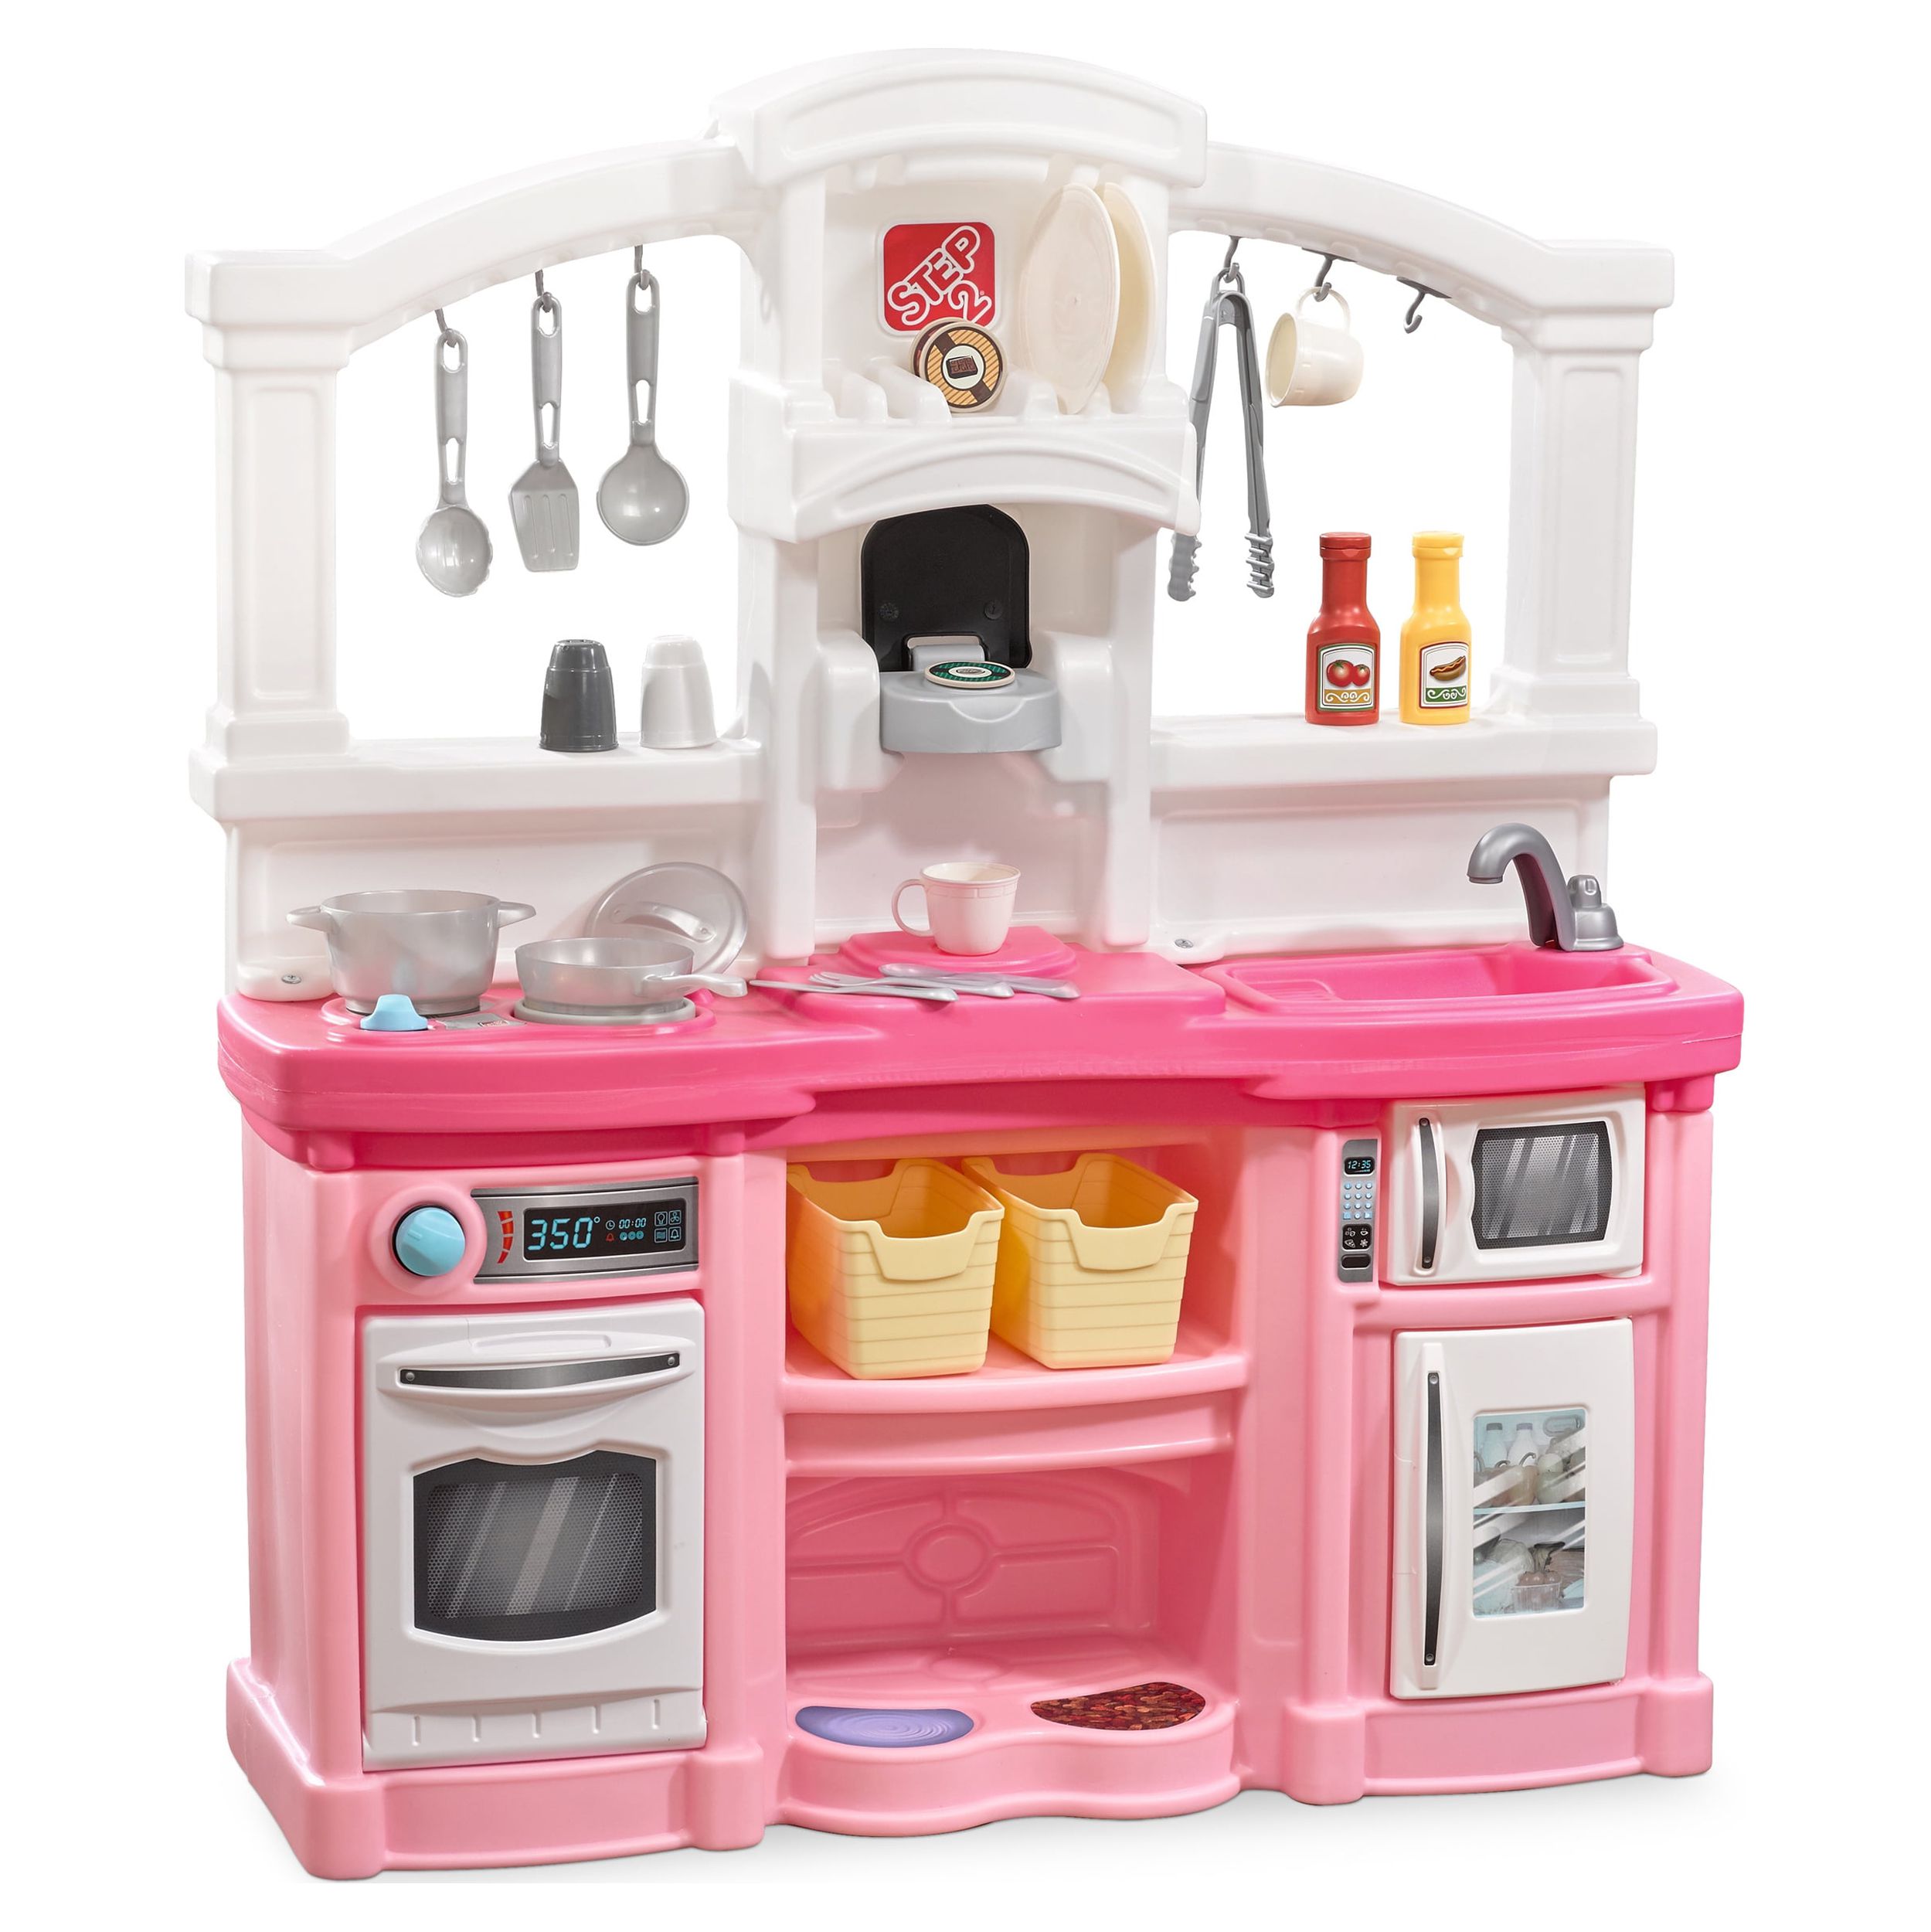 Step2 Fun with Friends Pink Toddler Kitchen Play Set - image 1 of 22